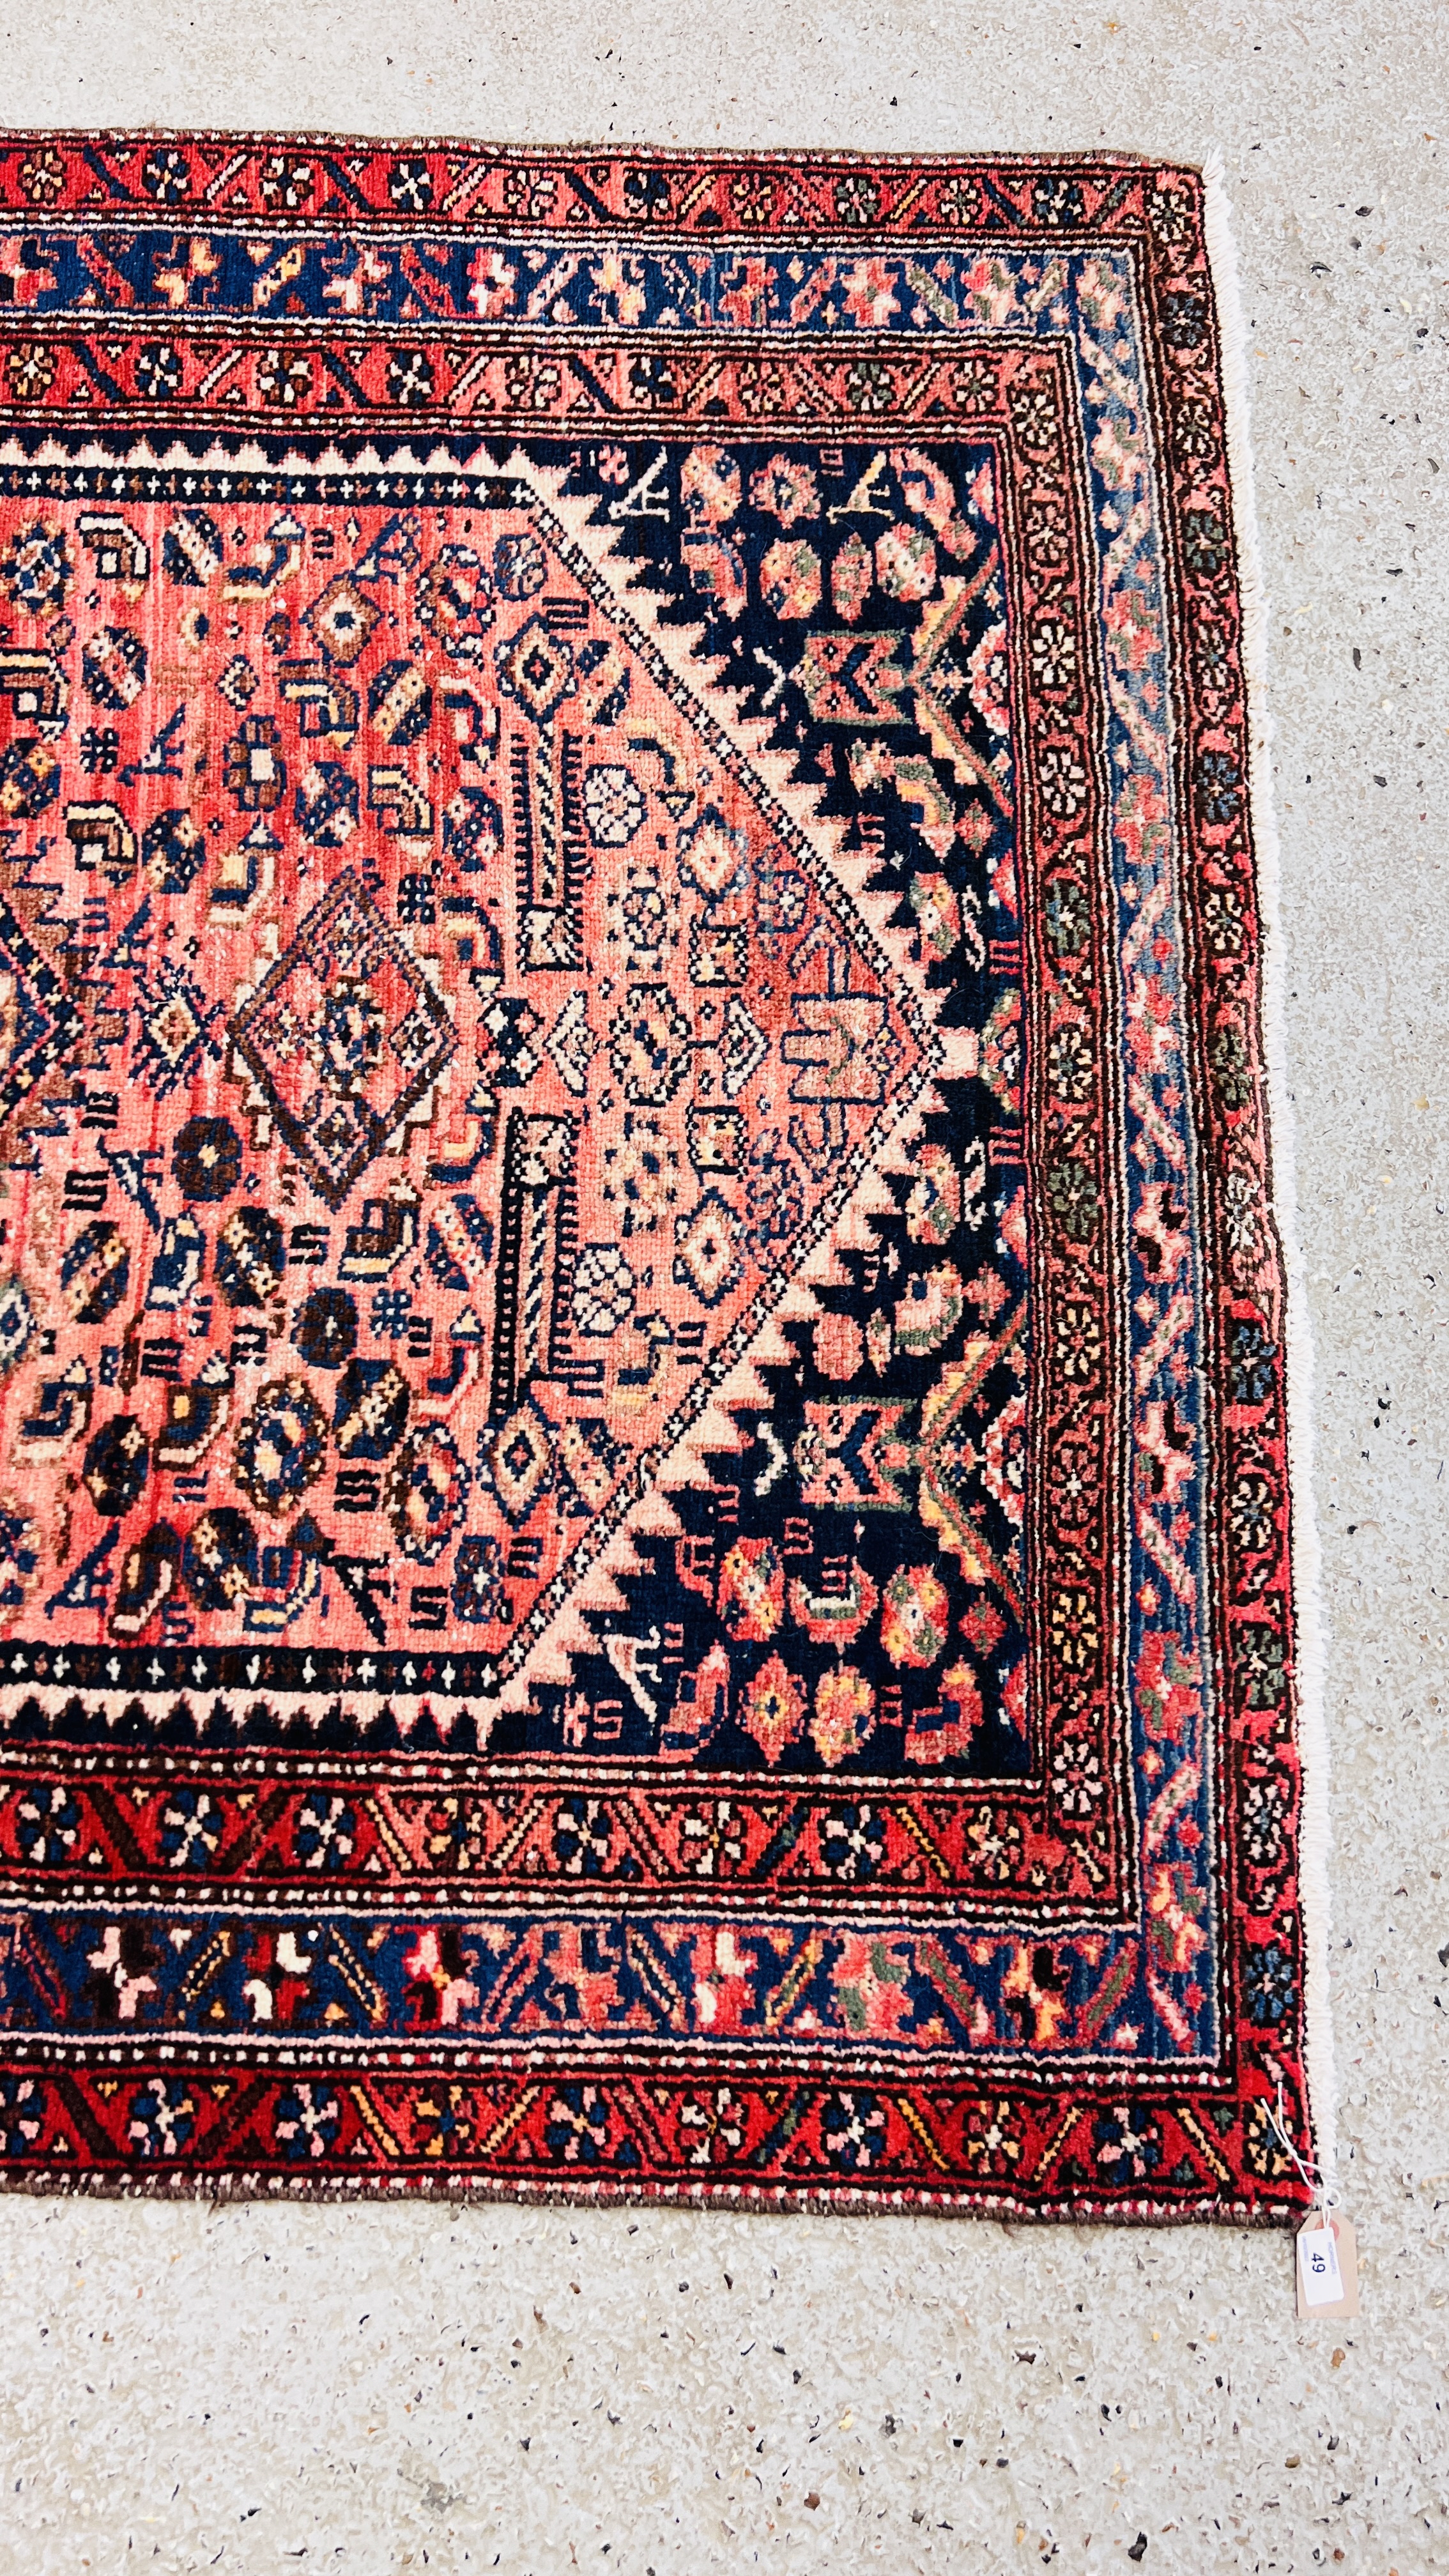 PERSIAN RUG, THE CENTRAL HEXAGON ON A RED FIELD WITH STYLIZED BIRDS L 195CM X W 128CM. - Image 2 of 5